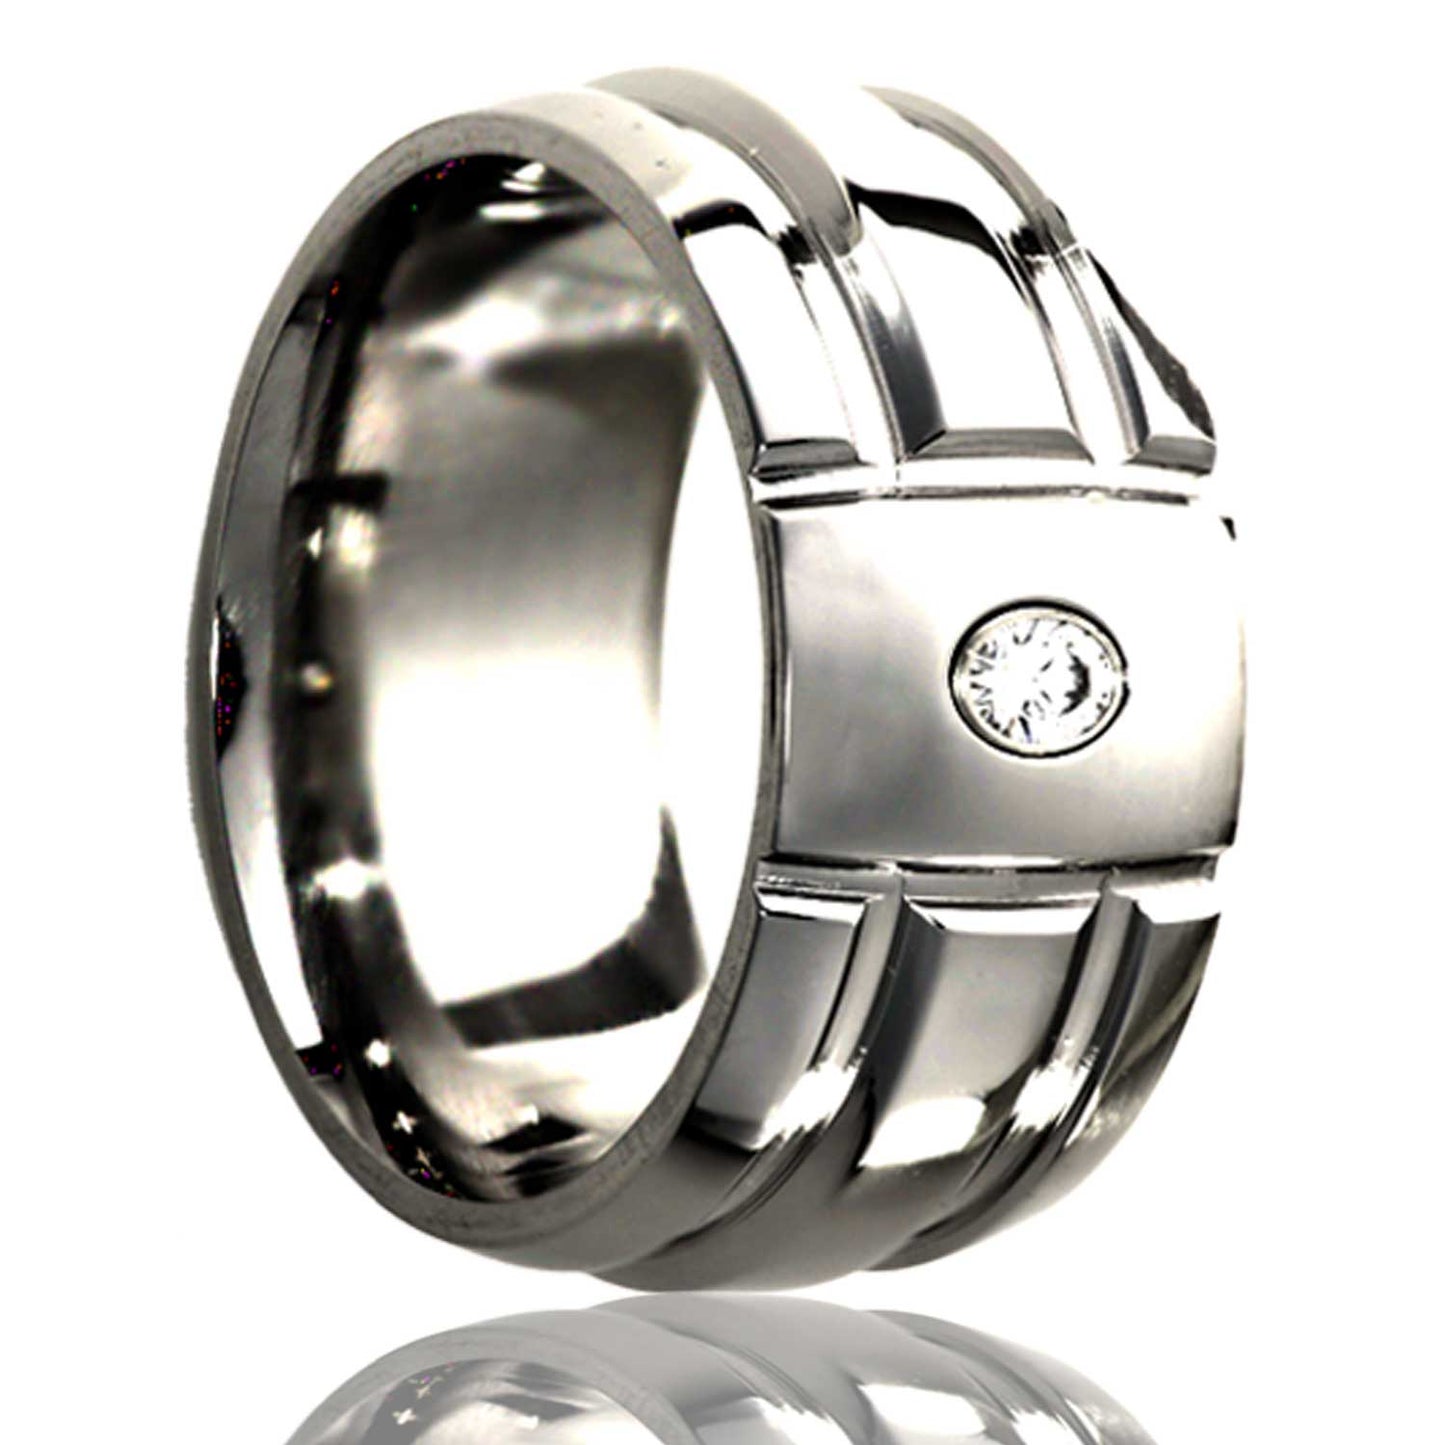 A grooved domed cobalt men's wedding band with diamond displayed on a neutral white background.